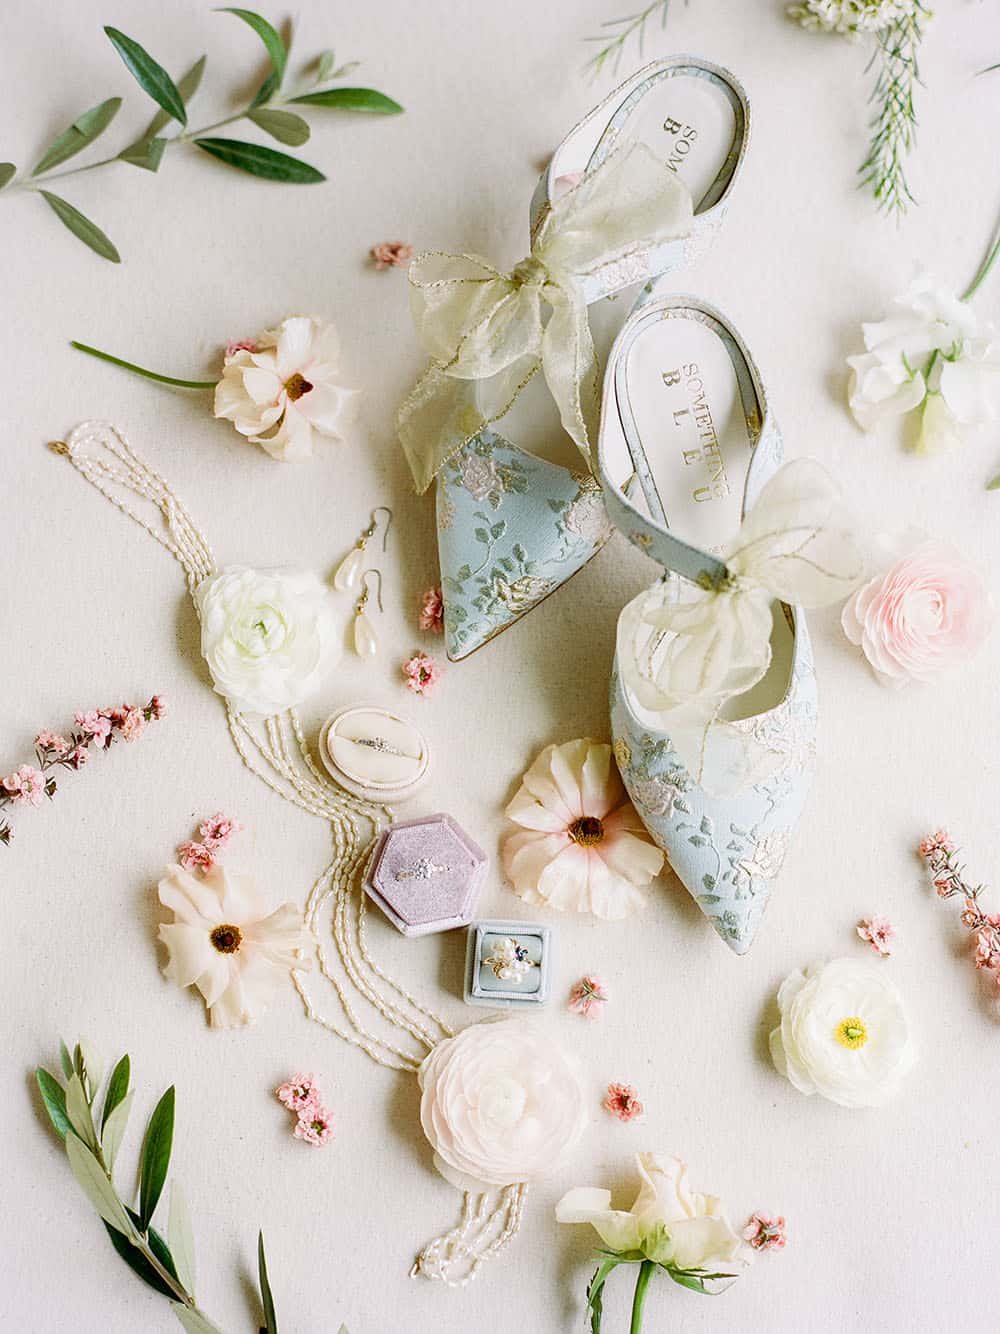 Jane Austen Wedding Mood For These Charming At Home Nuptials ⋆ Ruffled